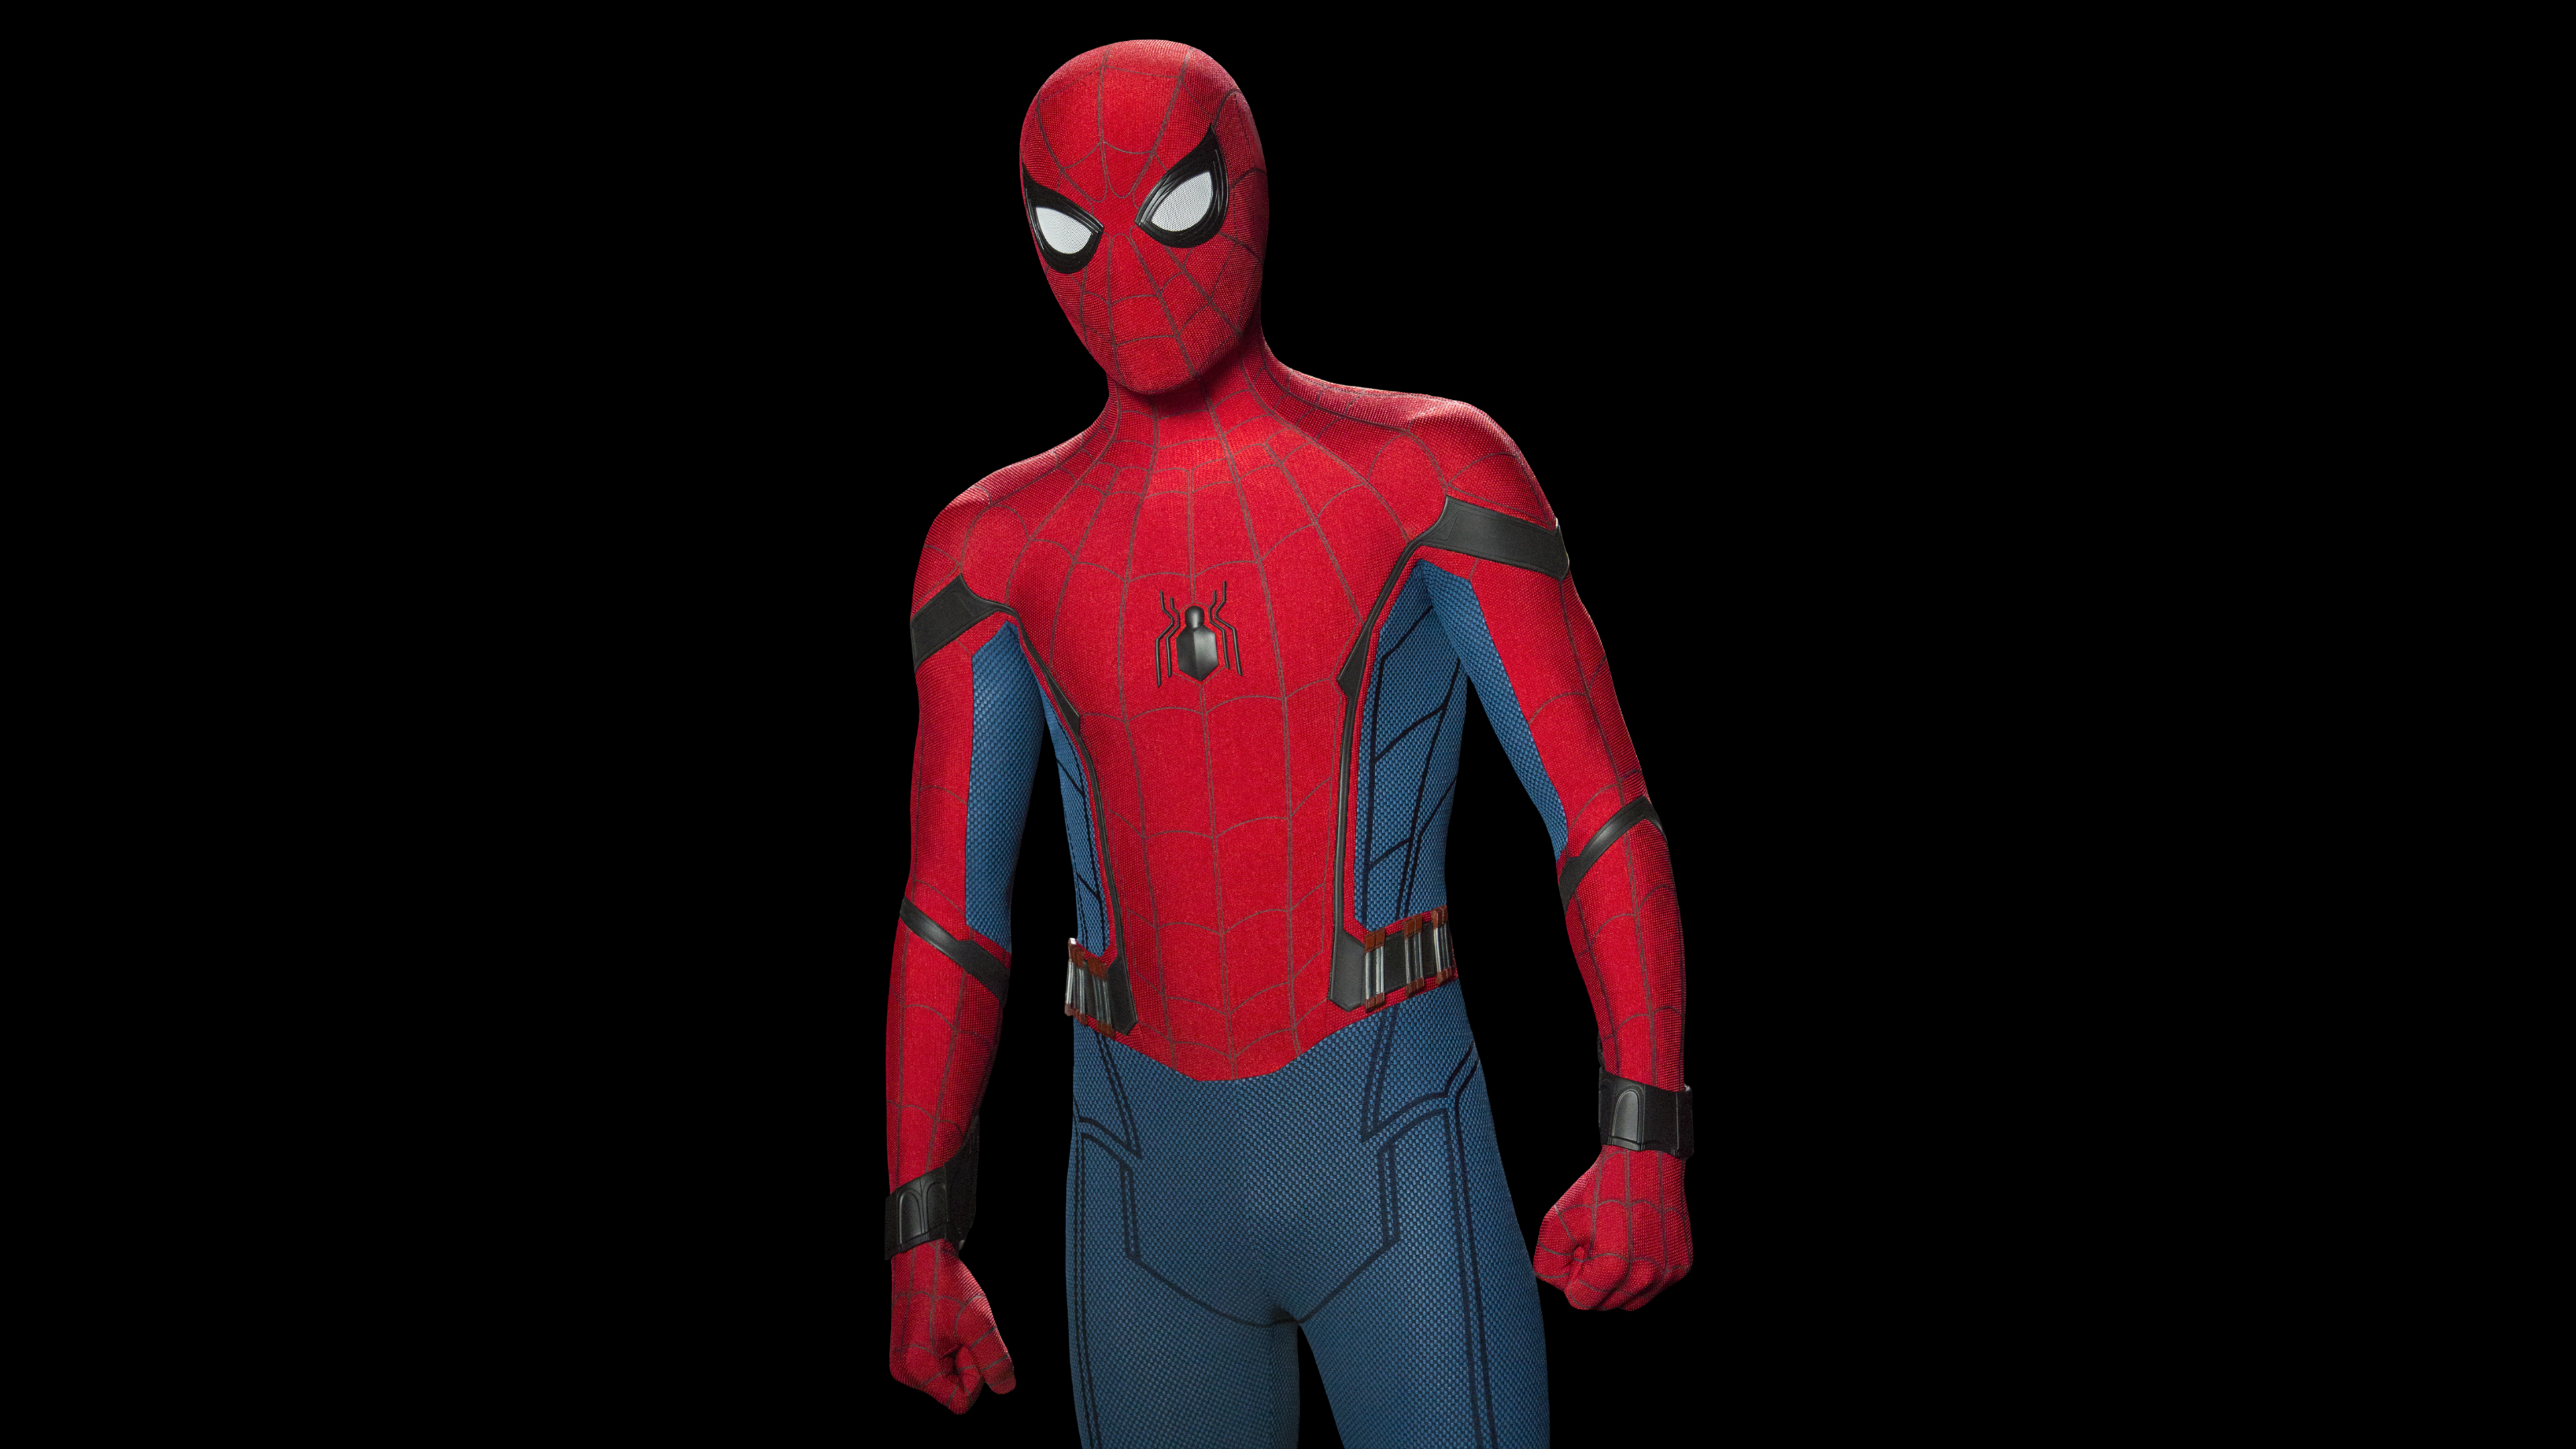 Spider-Man: Homecoming download the new